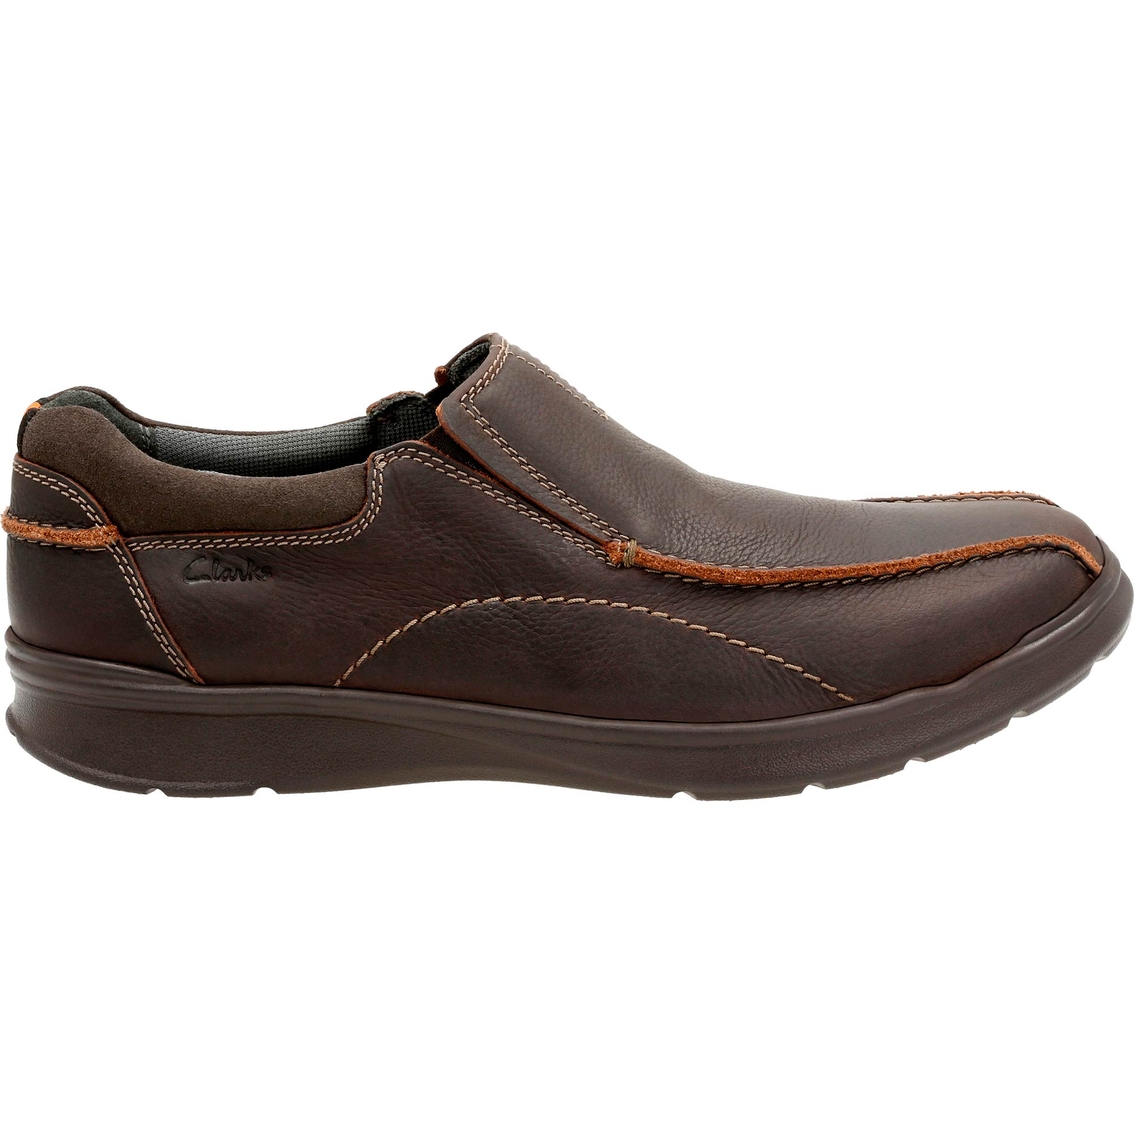 Clarks Men's Cotrell Step Slip On Shoes - Image 2 of 4